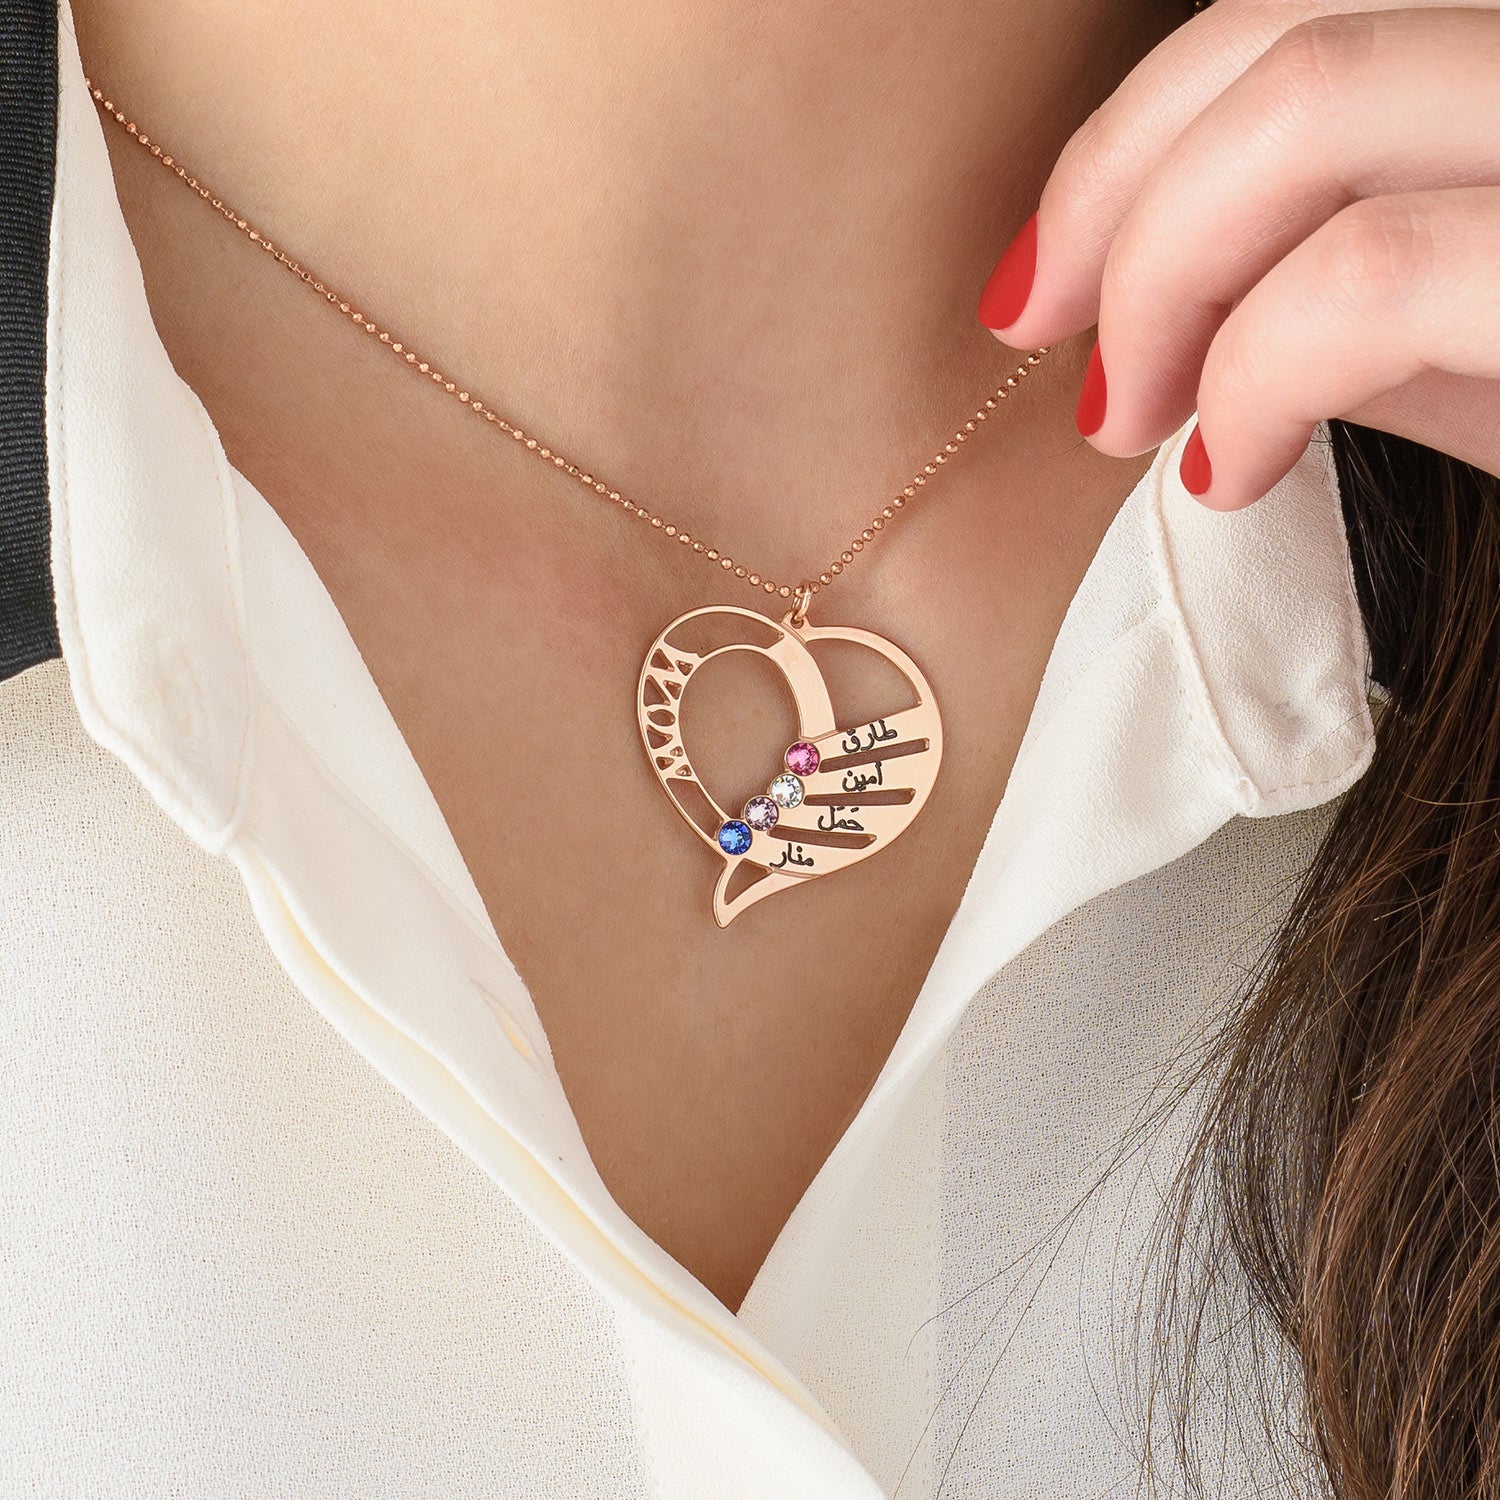 Necklace with engraved birthstone for mother in rose gold plating